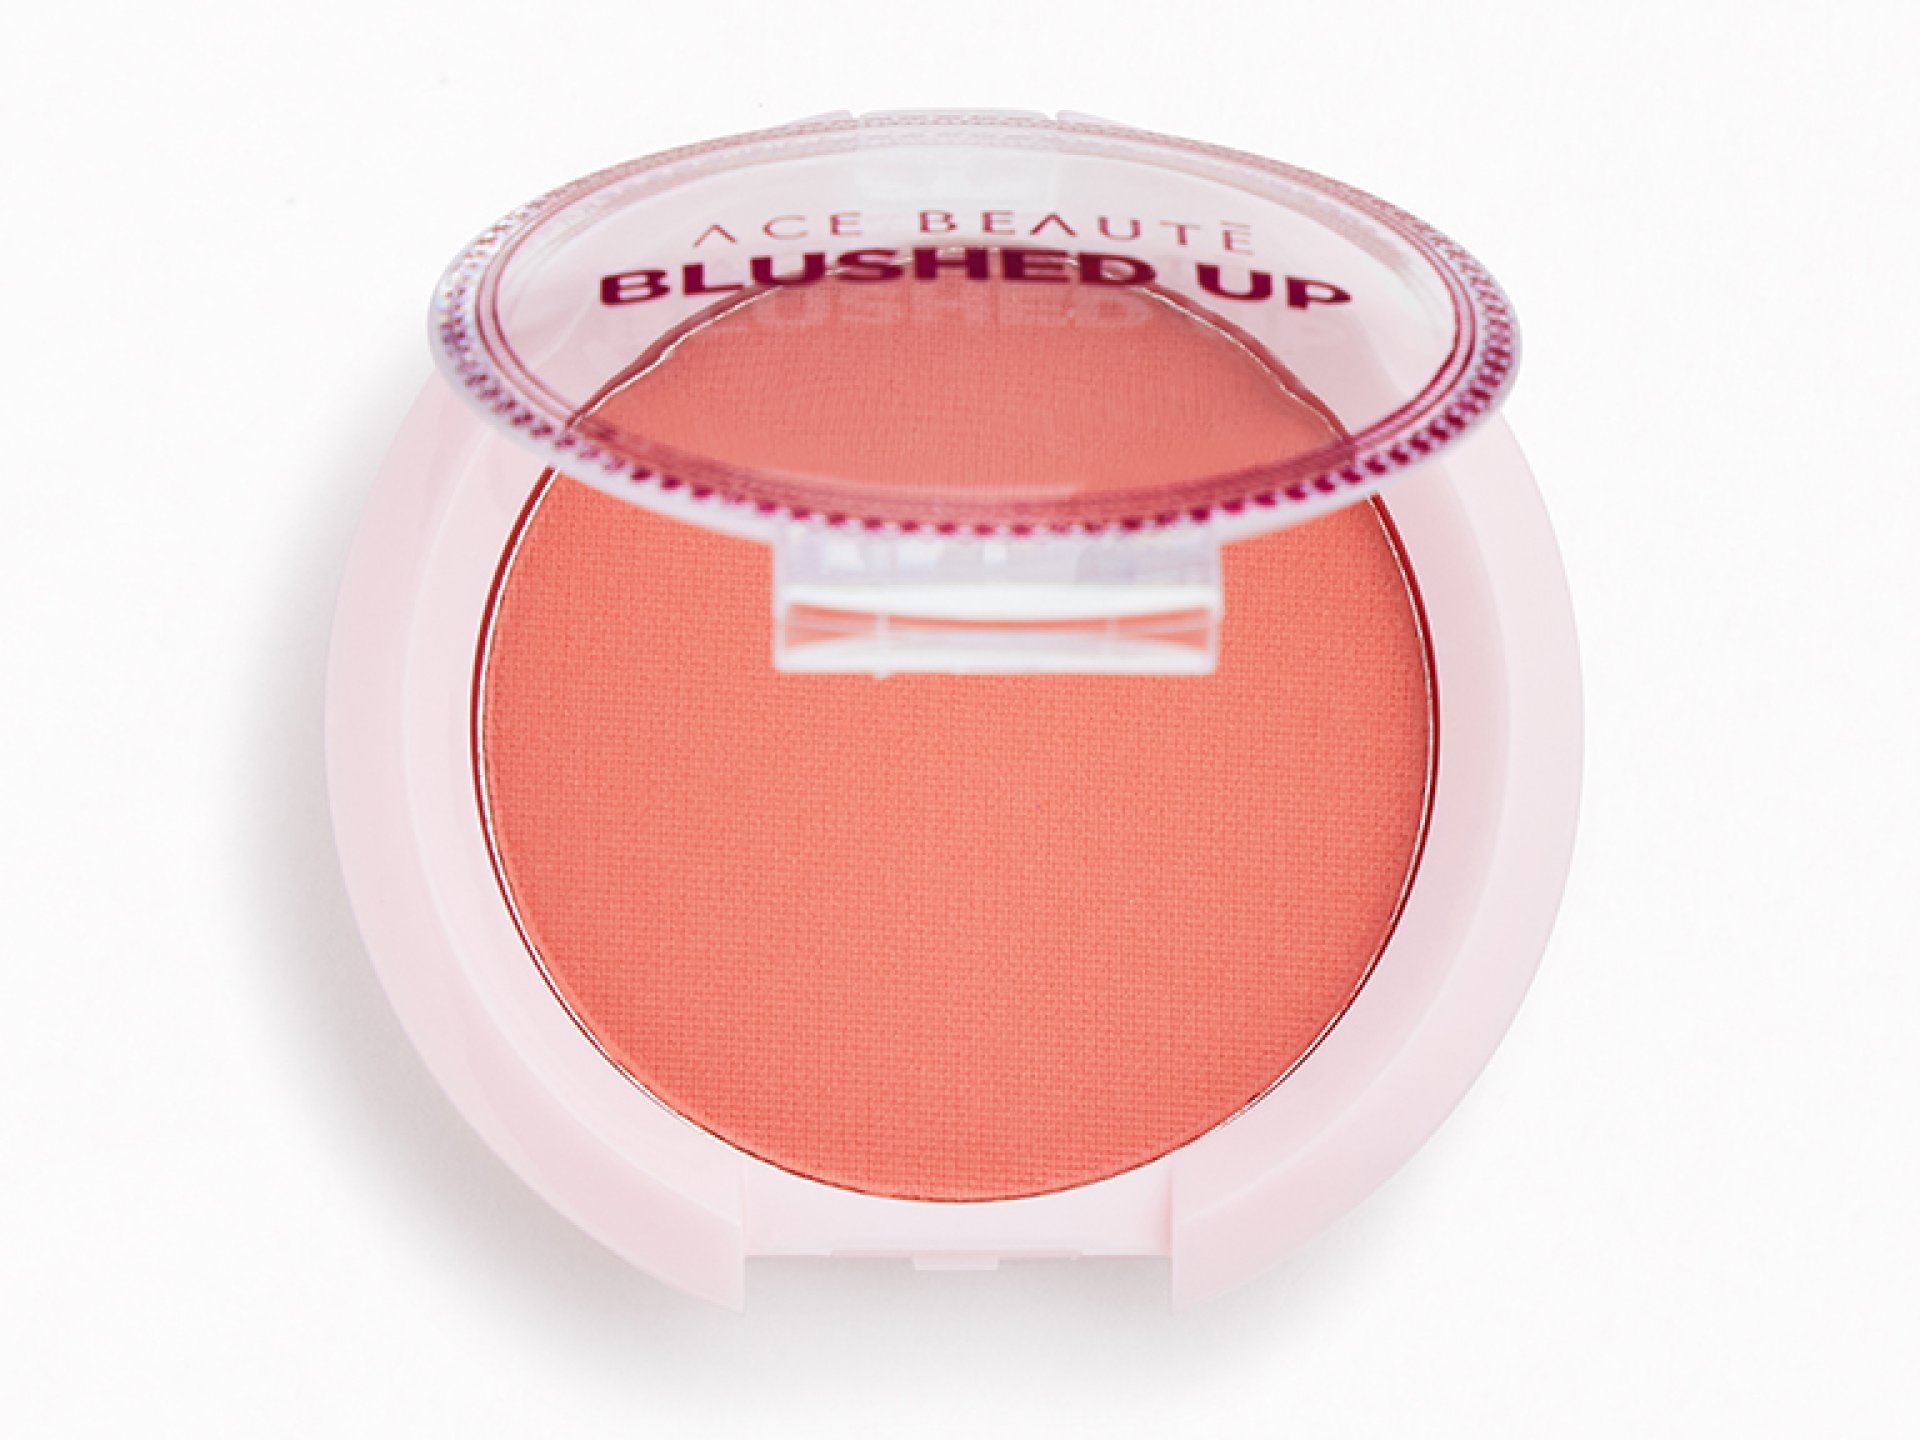 ACE BEAUTÉ Blushed Up Blush in Peachy